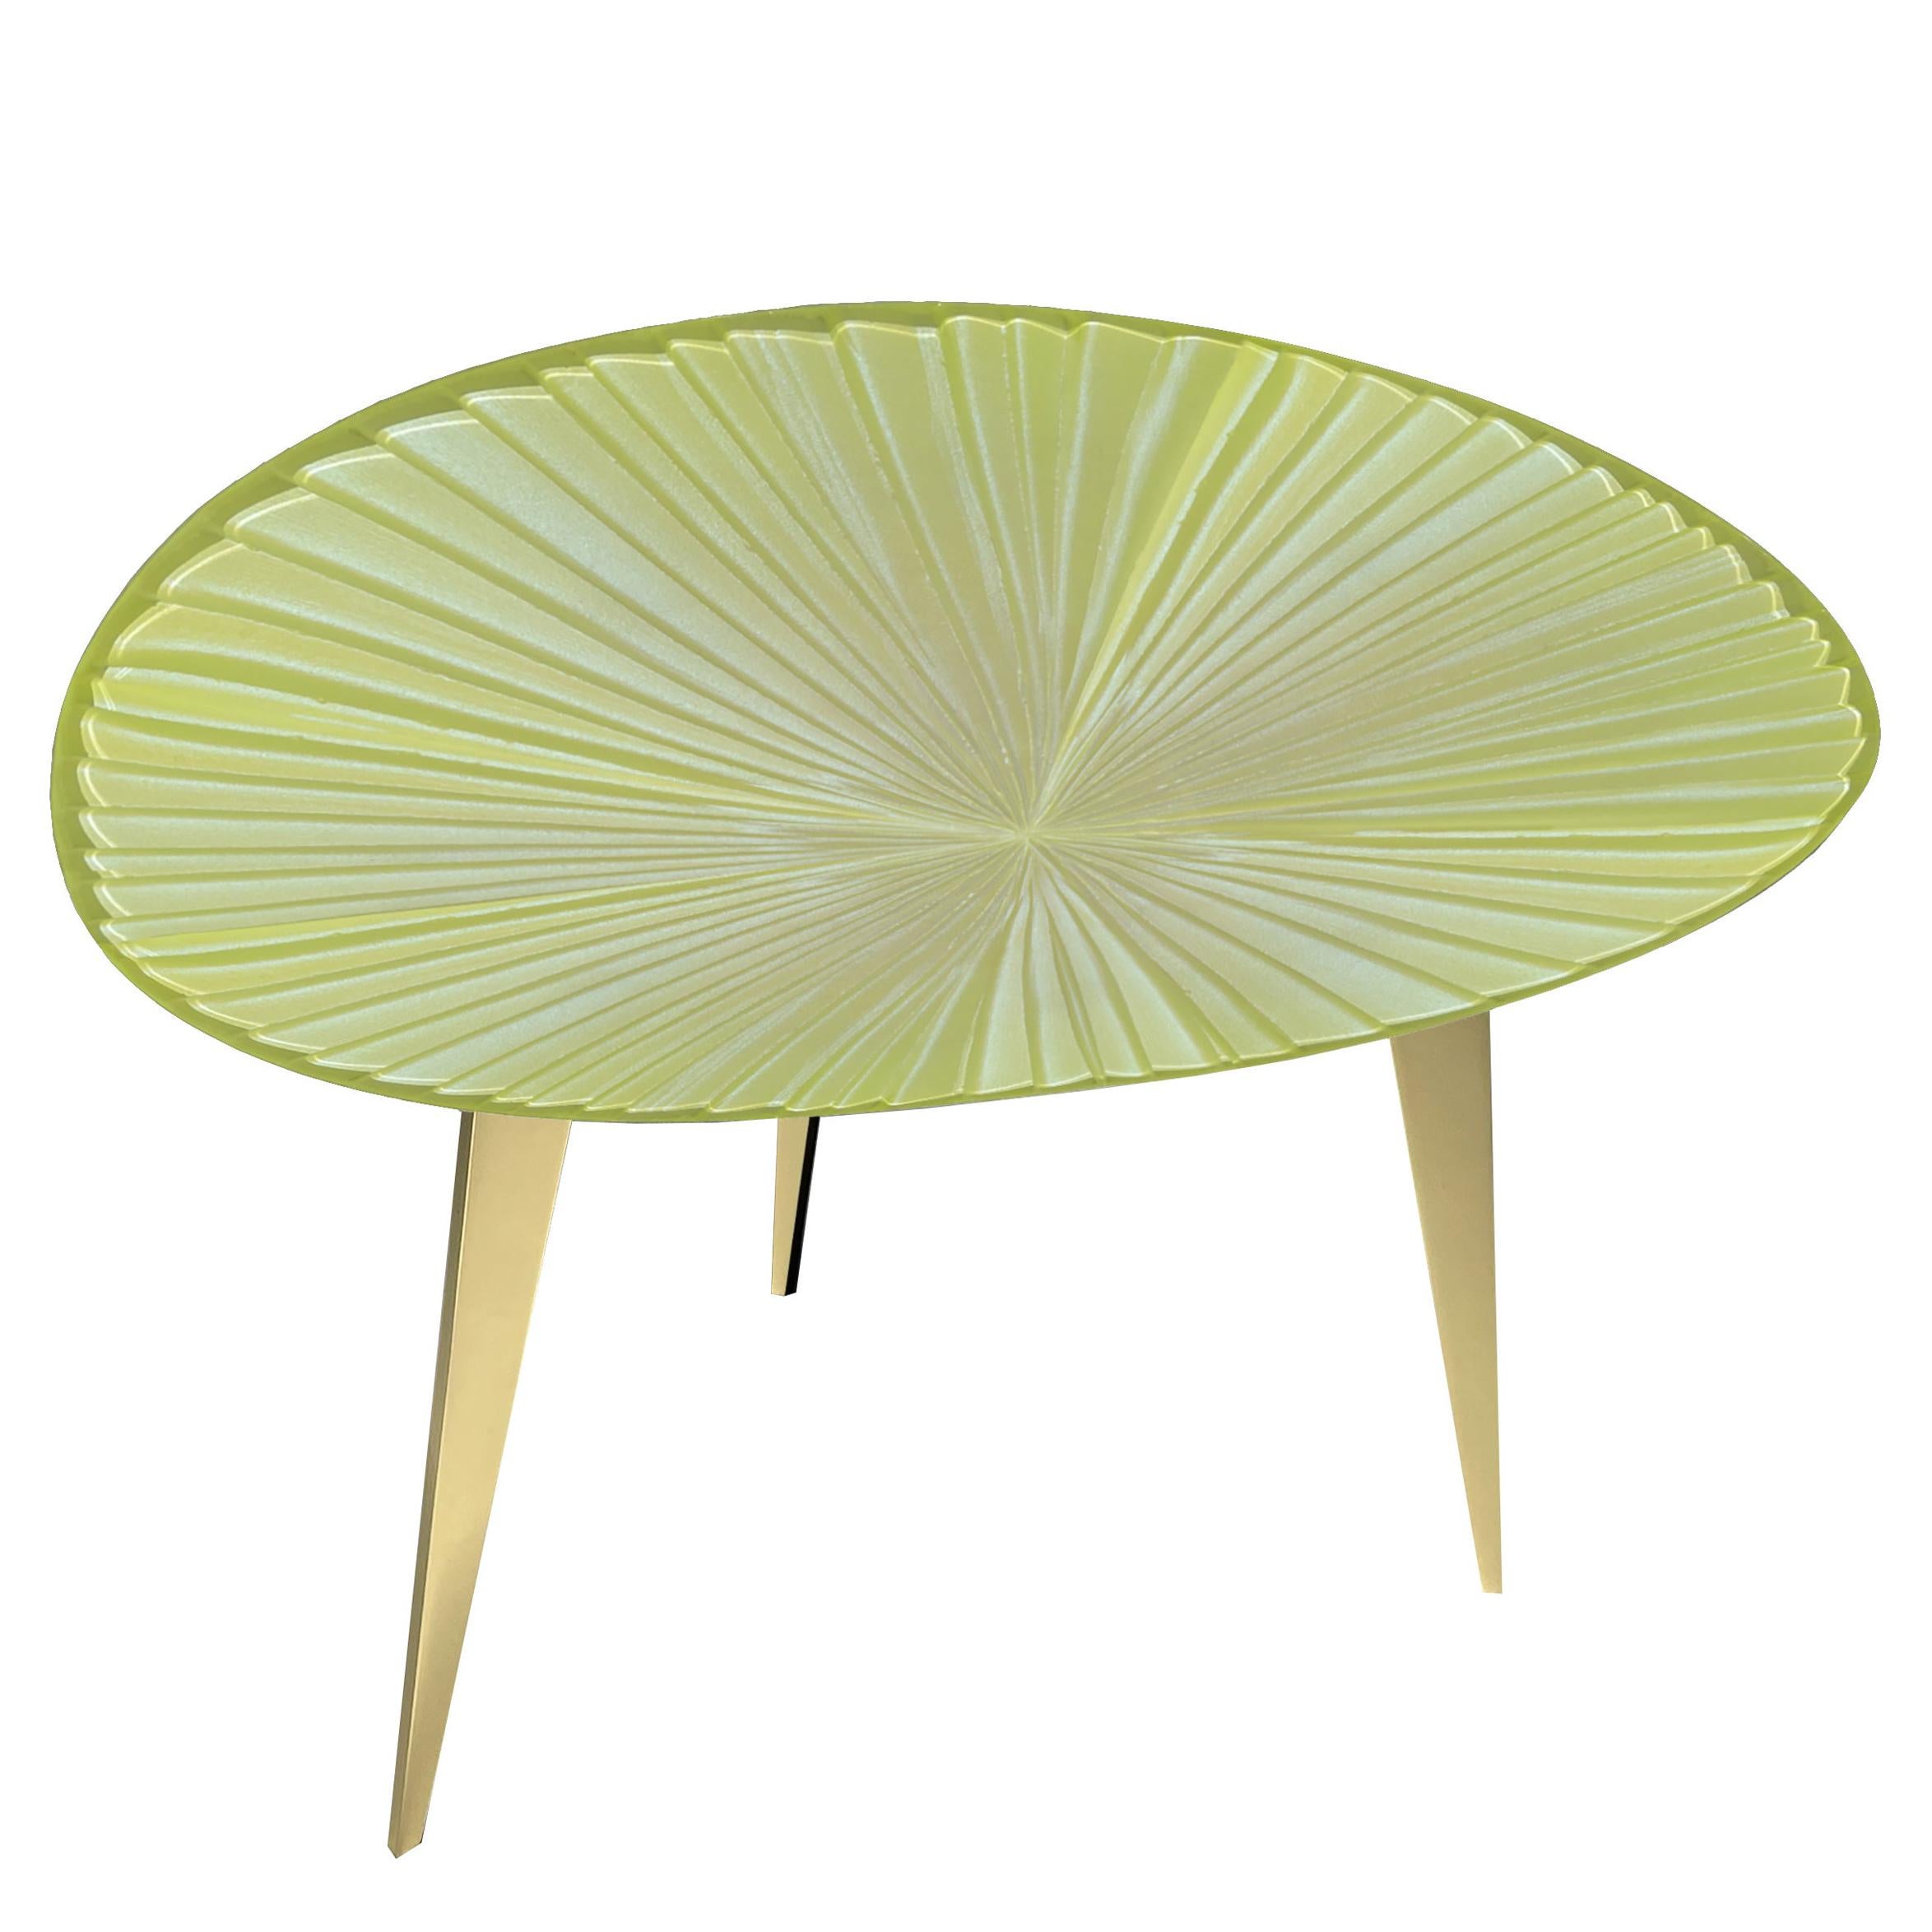 Contemporary 'Fluo' Coffee Table Iridescent Yellow Crystal by Ghirò Studio For Sale